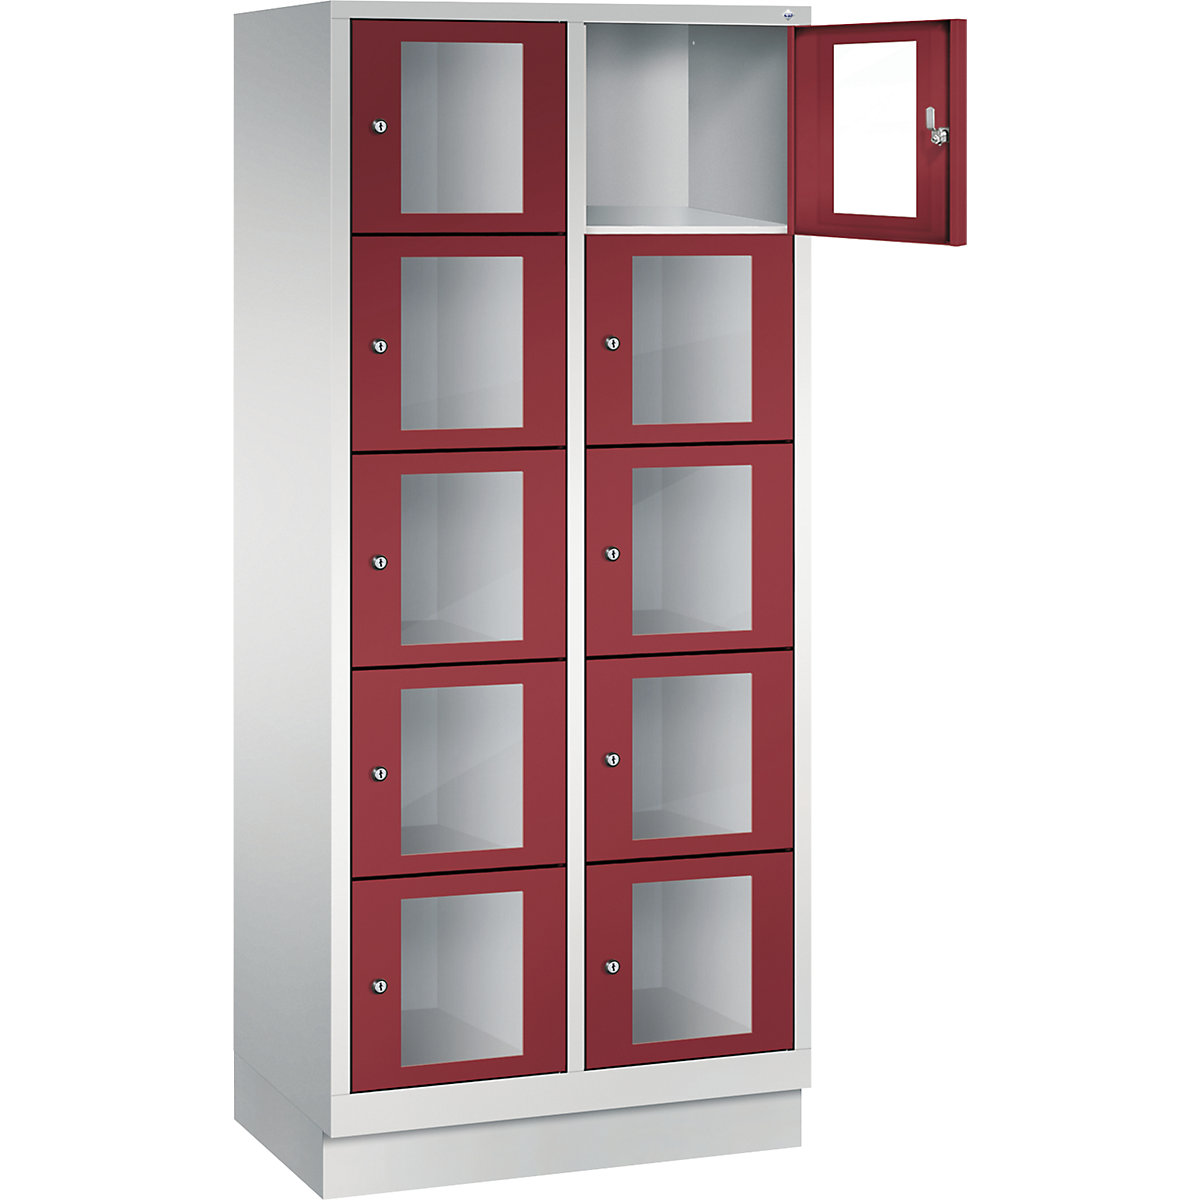 C+P – CLASSIC locker unit, compartment height 295 mm, with plinth, 10 compartments, width 810 mm, ruby red door